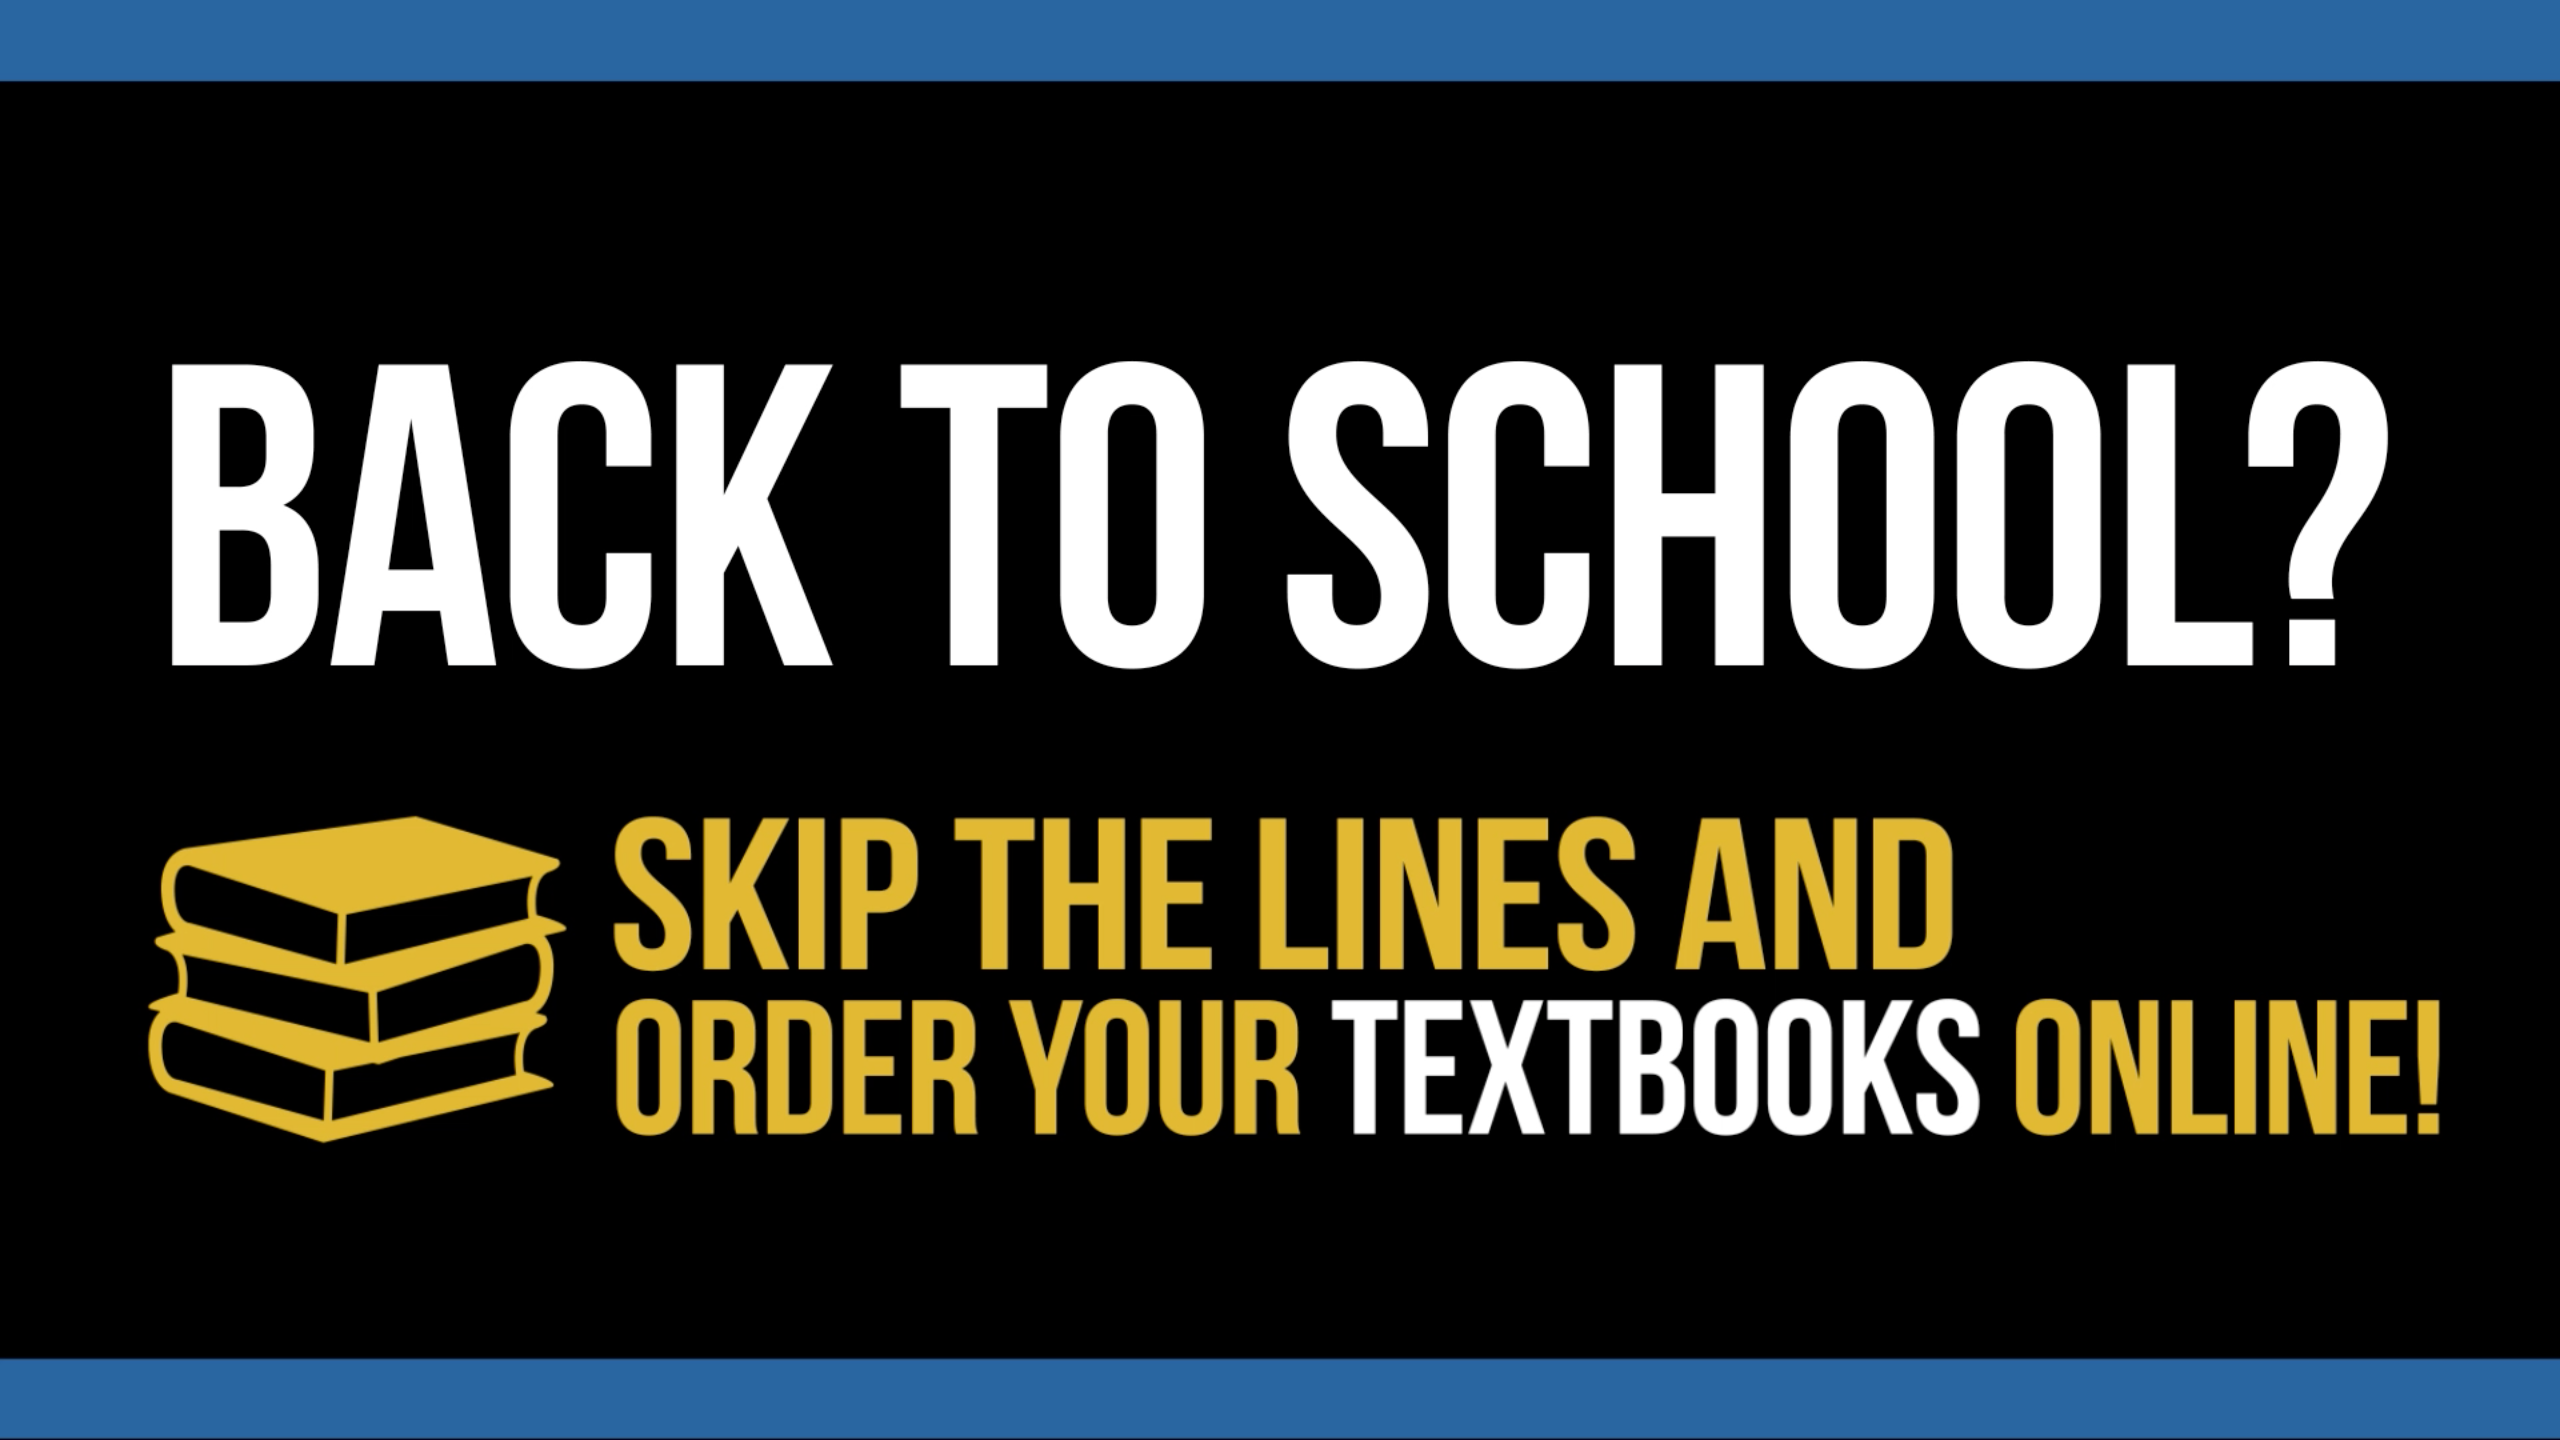 example of promo - image reads back to school - skip the lines and order your textbooks online